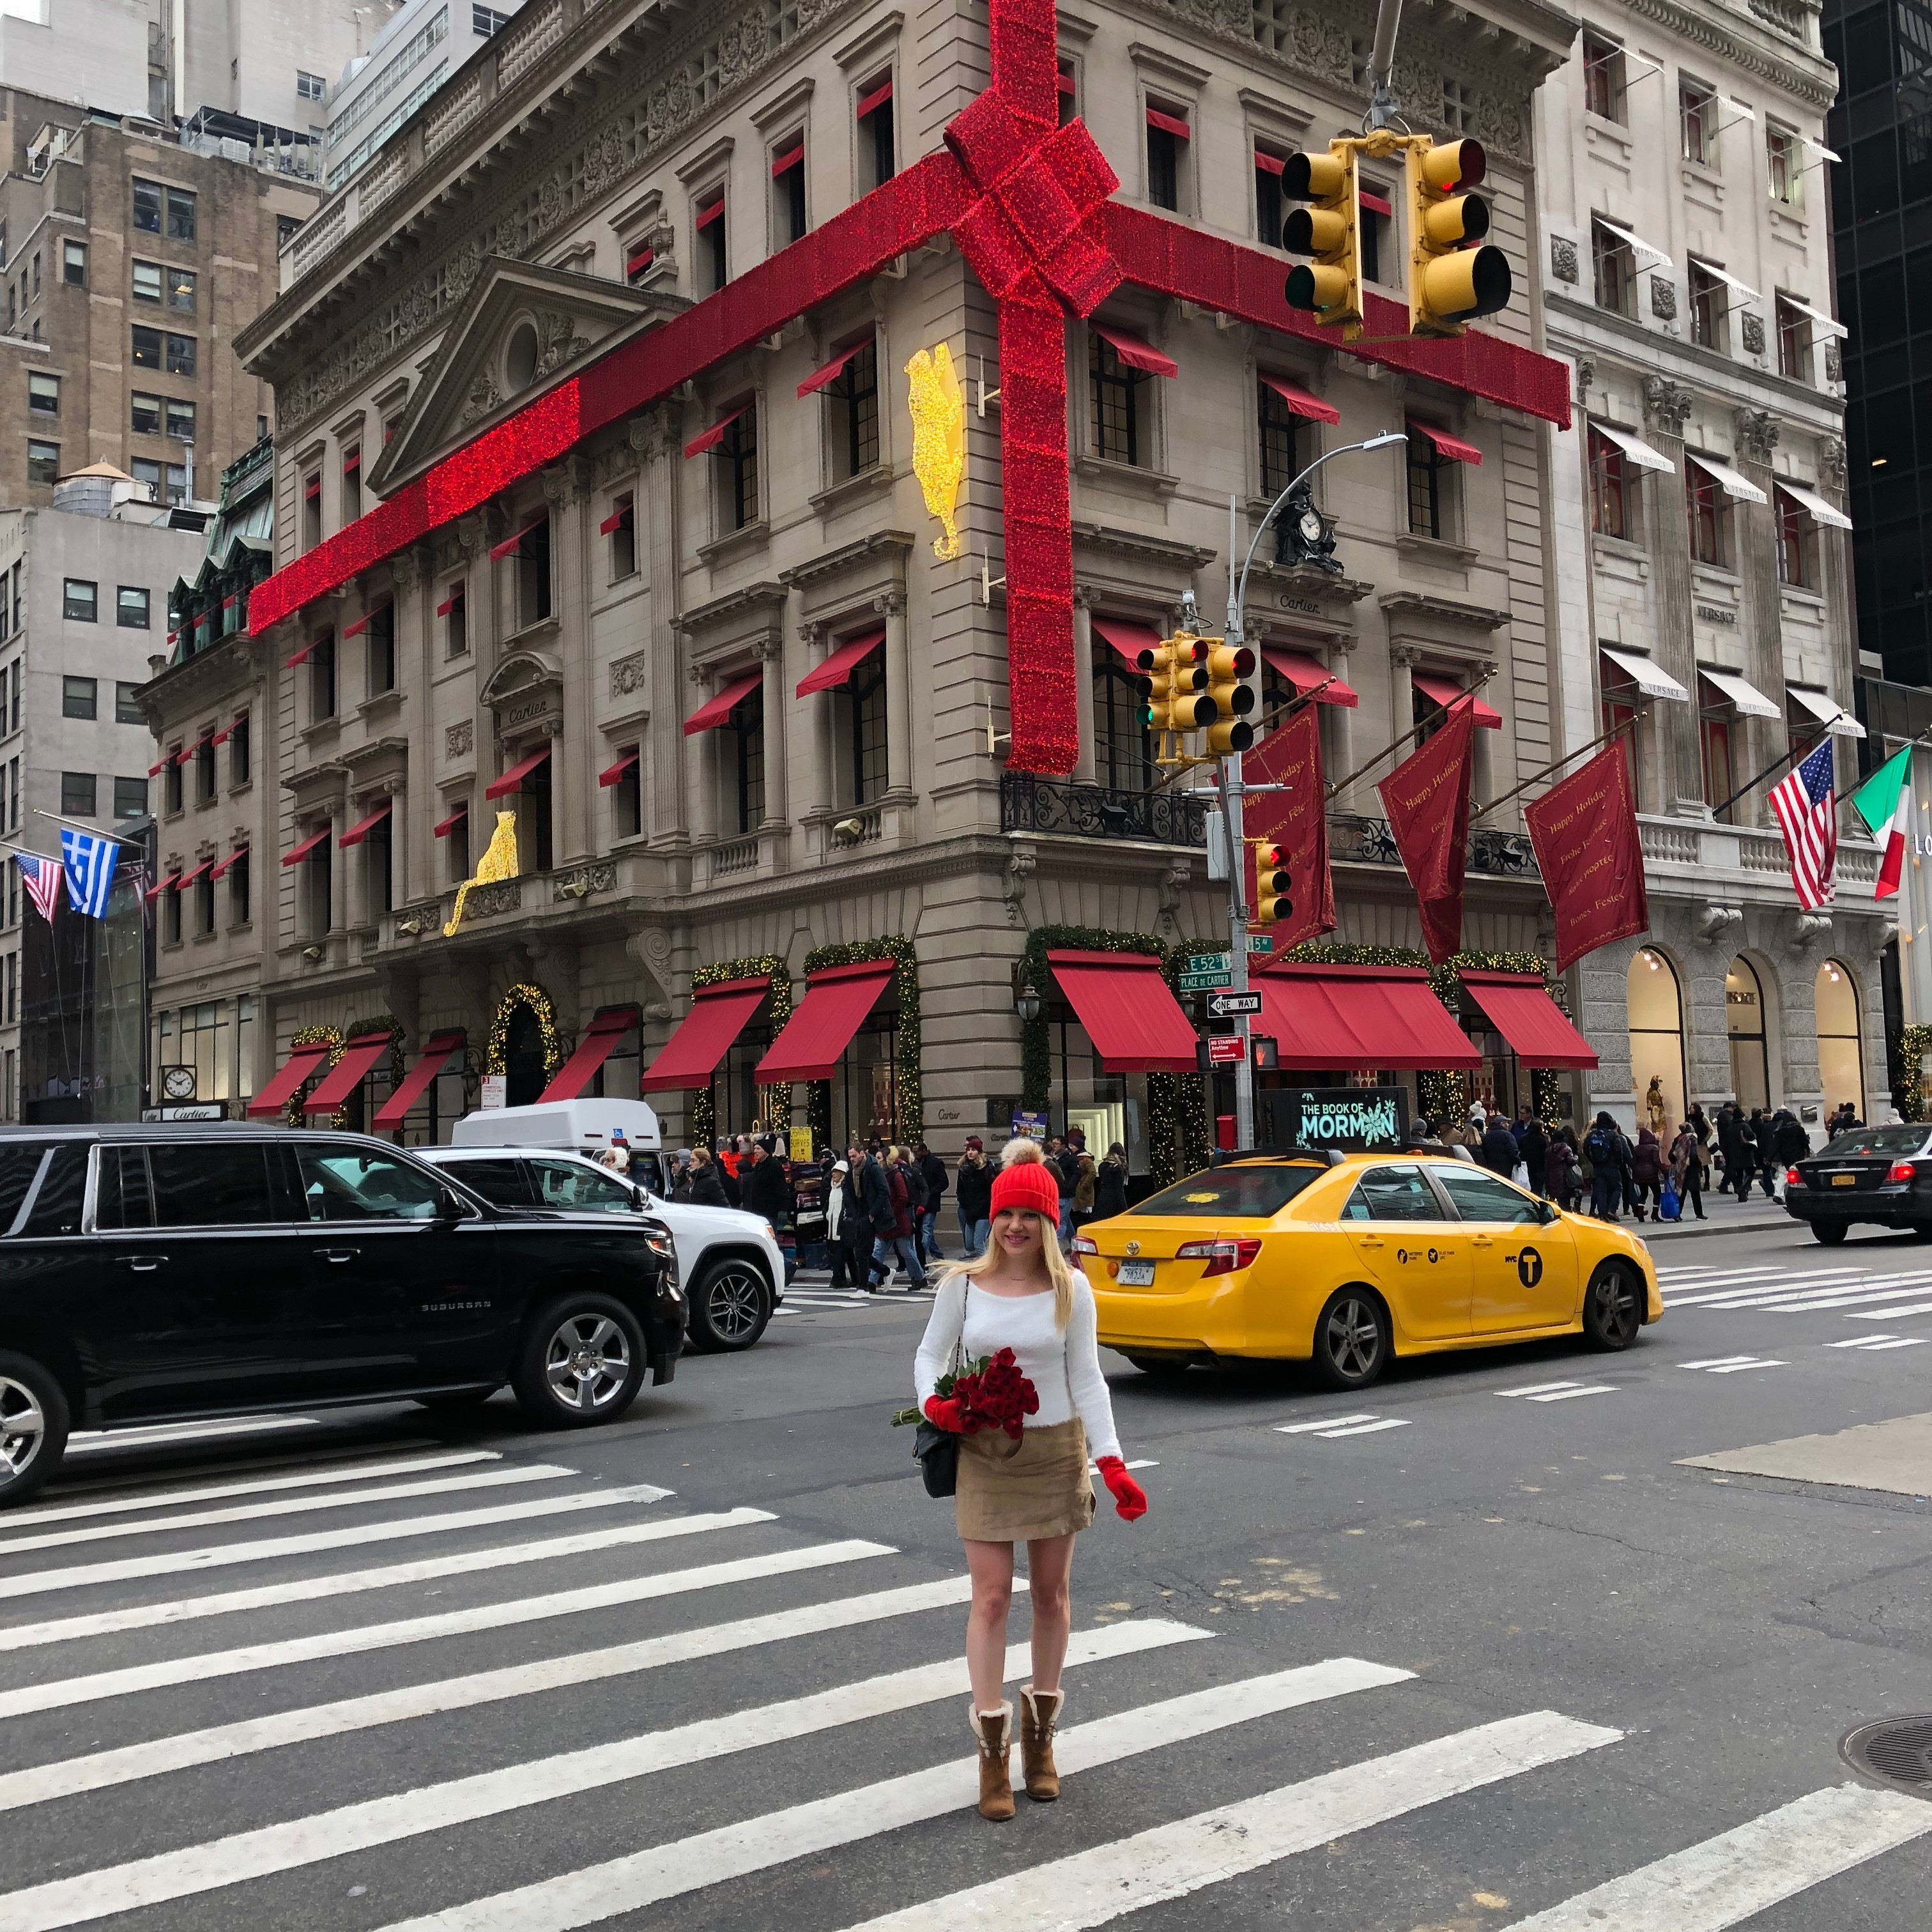 NYC building wrapped in a big sparkly red bow, red winter accessories, white fuzzy sweater